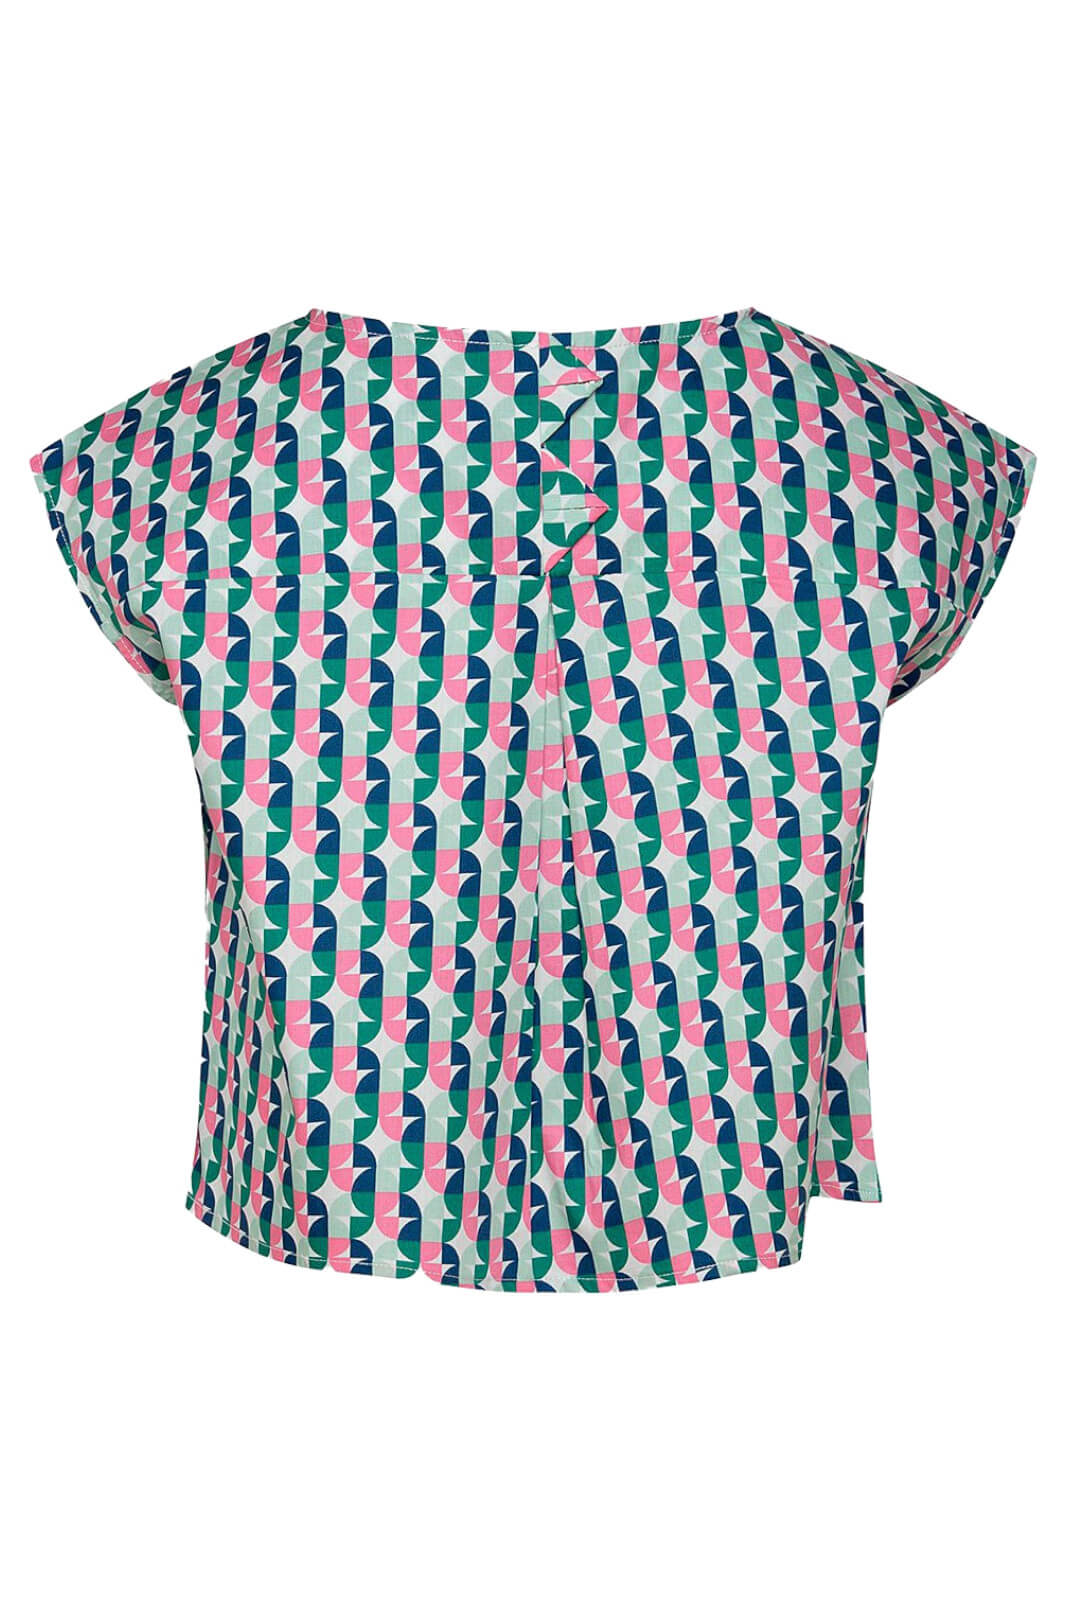 Pepe Jeans girl's blouse with geometric pattern AGNESA